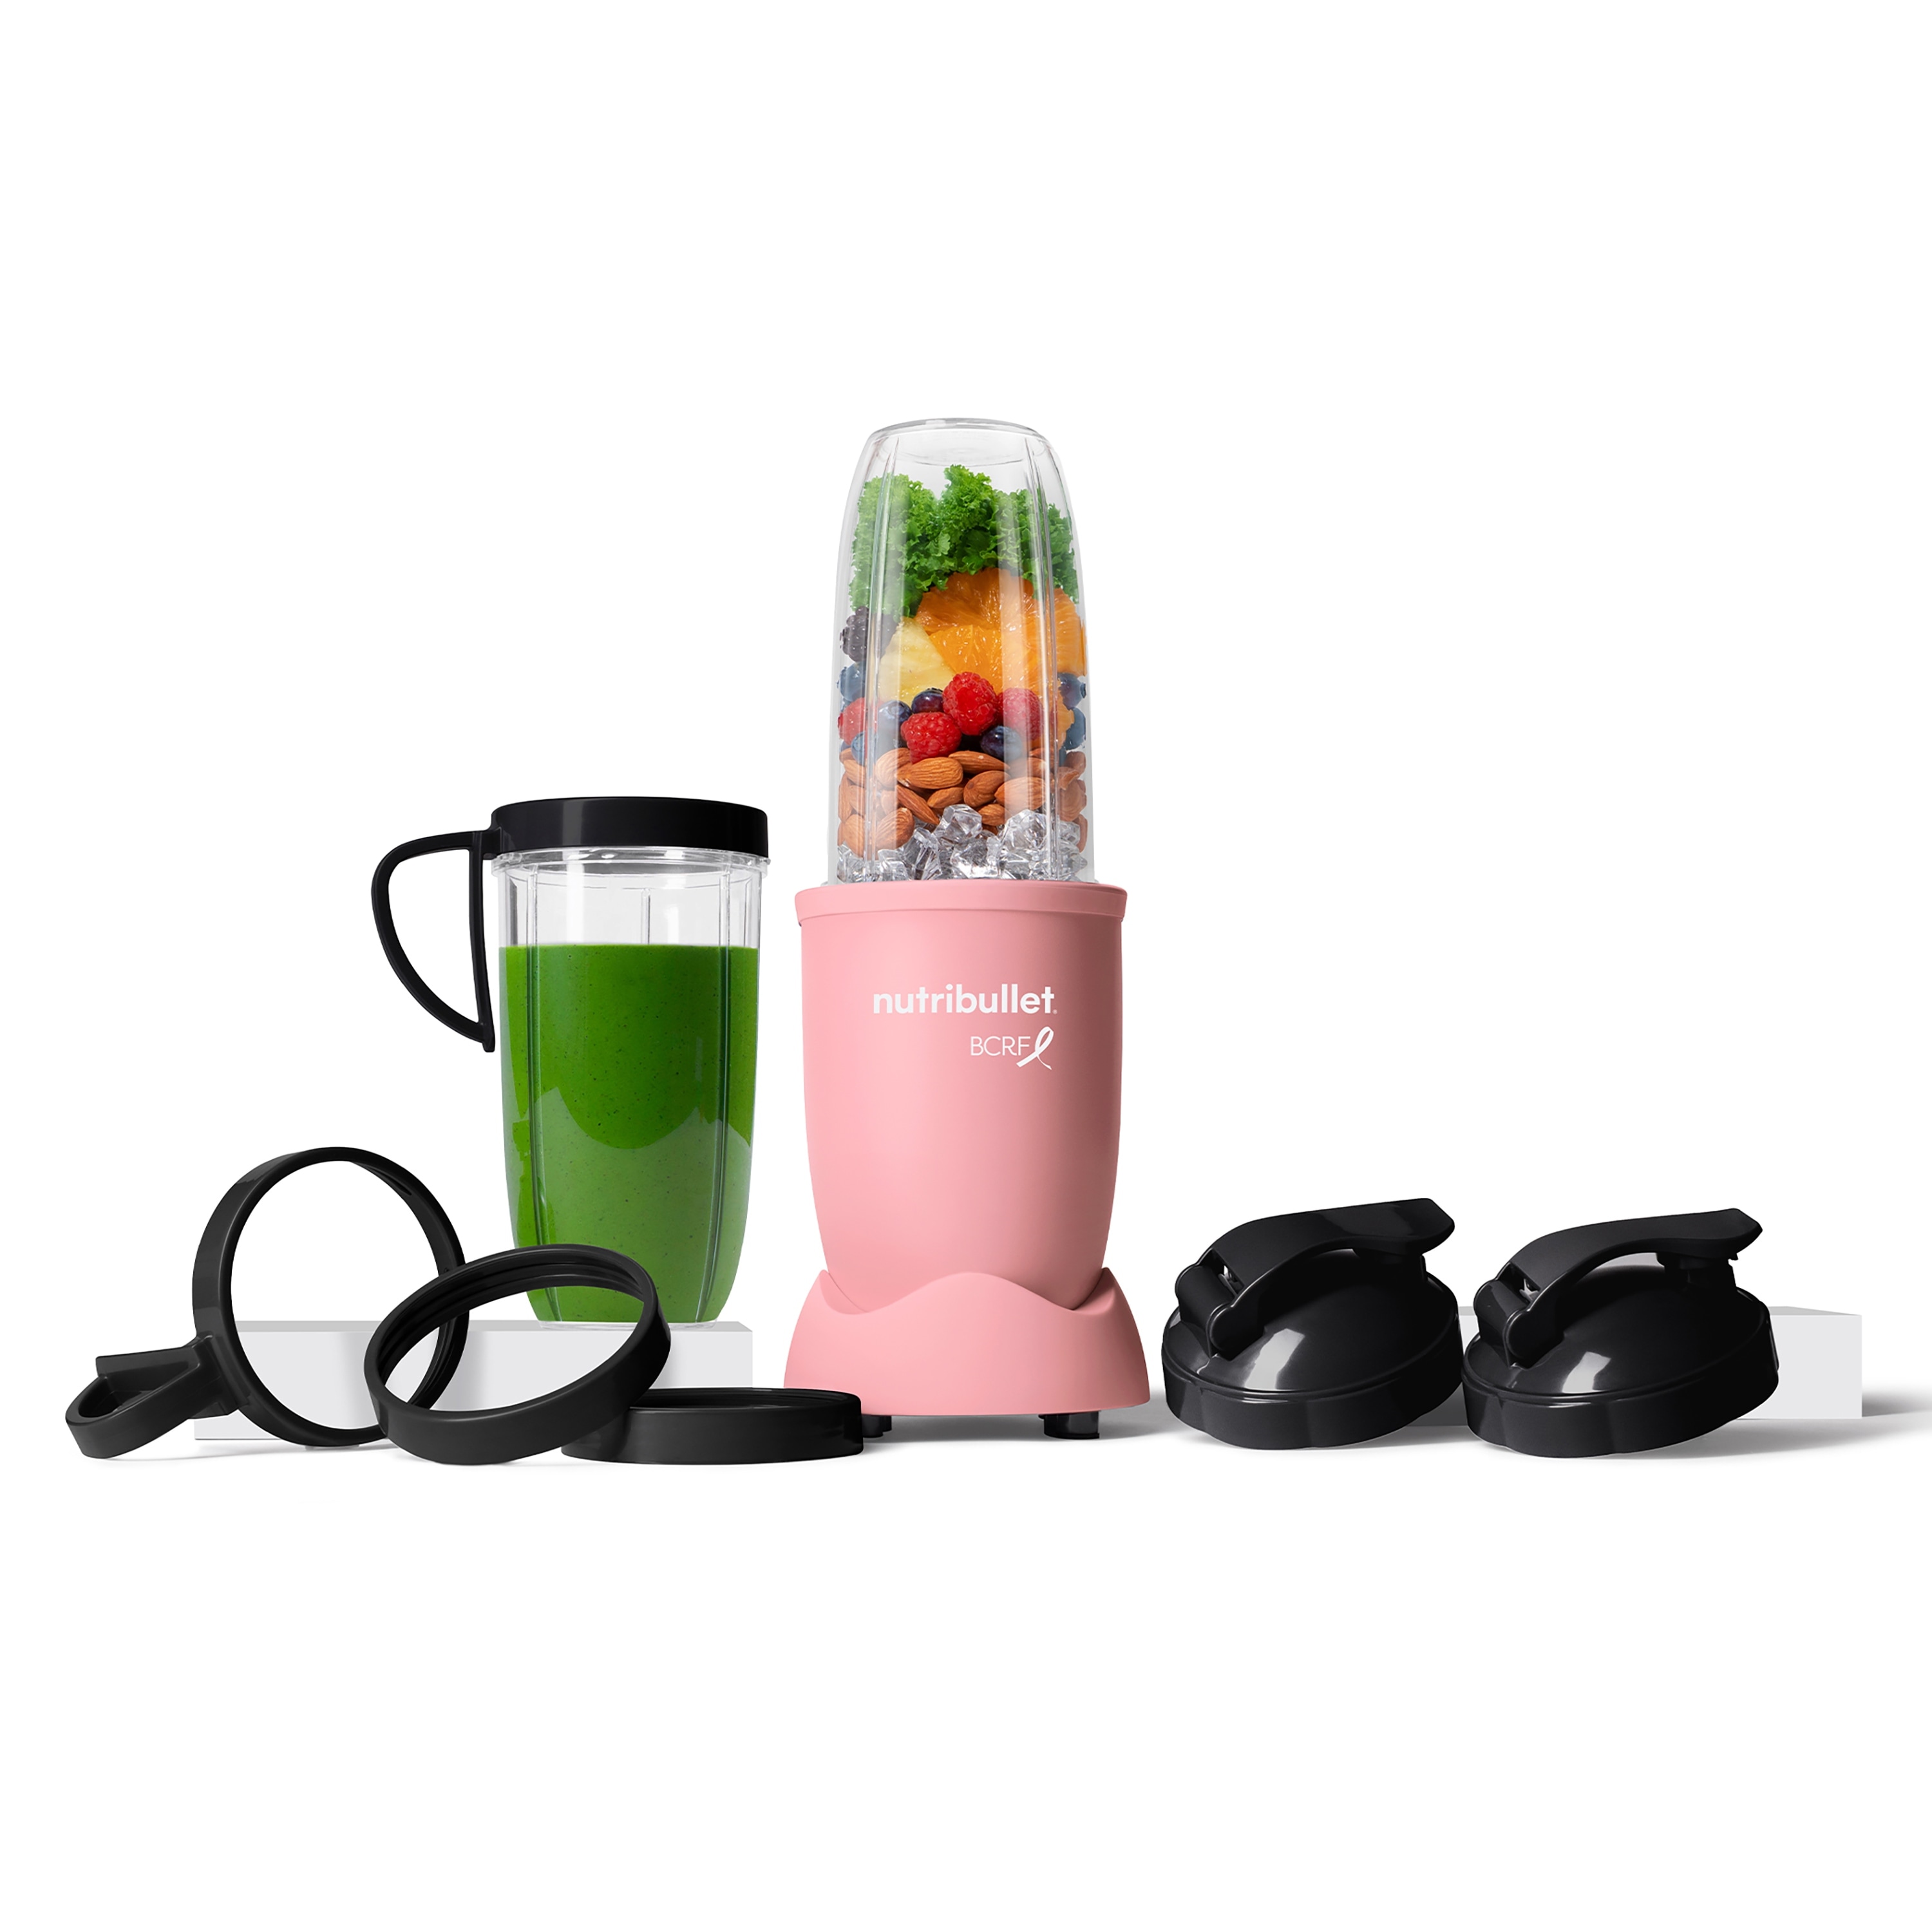 https://ak1.ostkcdn.com/images/products/is/images/direct/0caee7361f1c10a42be90c5f2df44c4131994b07/Nutribullet-PRO-BCRF-Exclusive%2C-12pc.-Matte-Soft-Pink.jpg